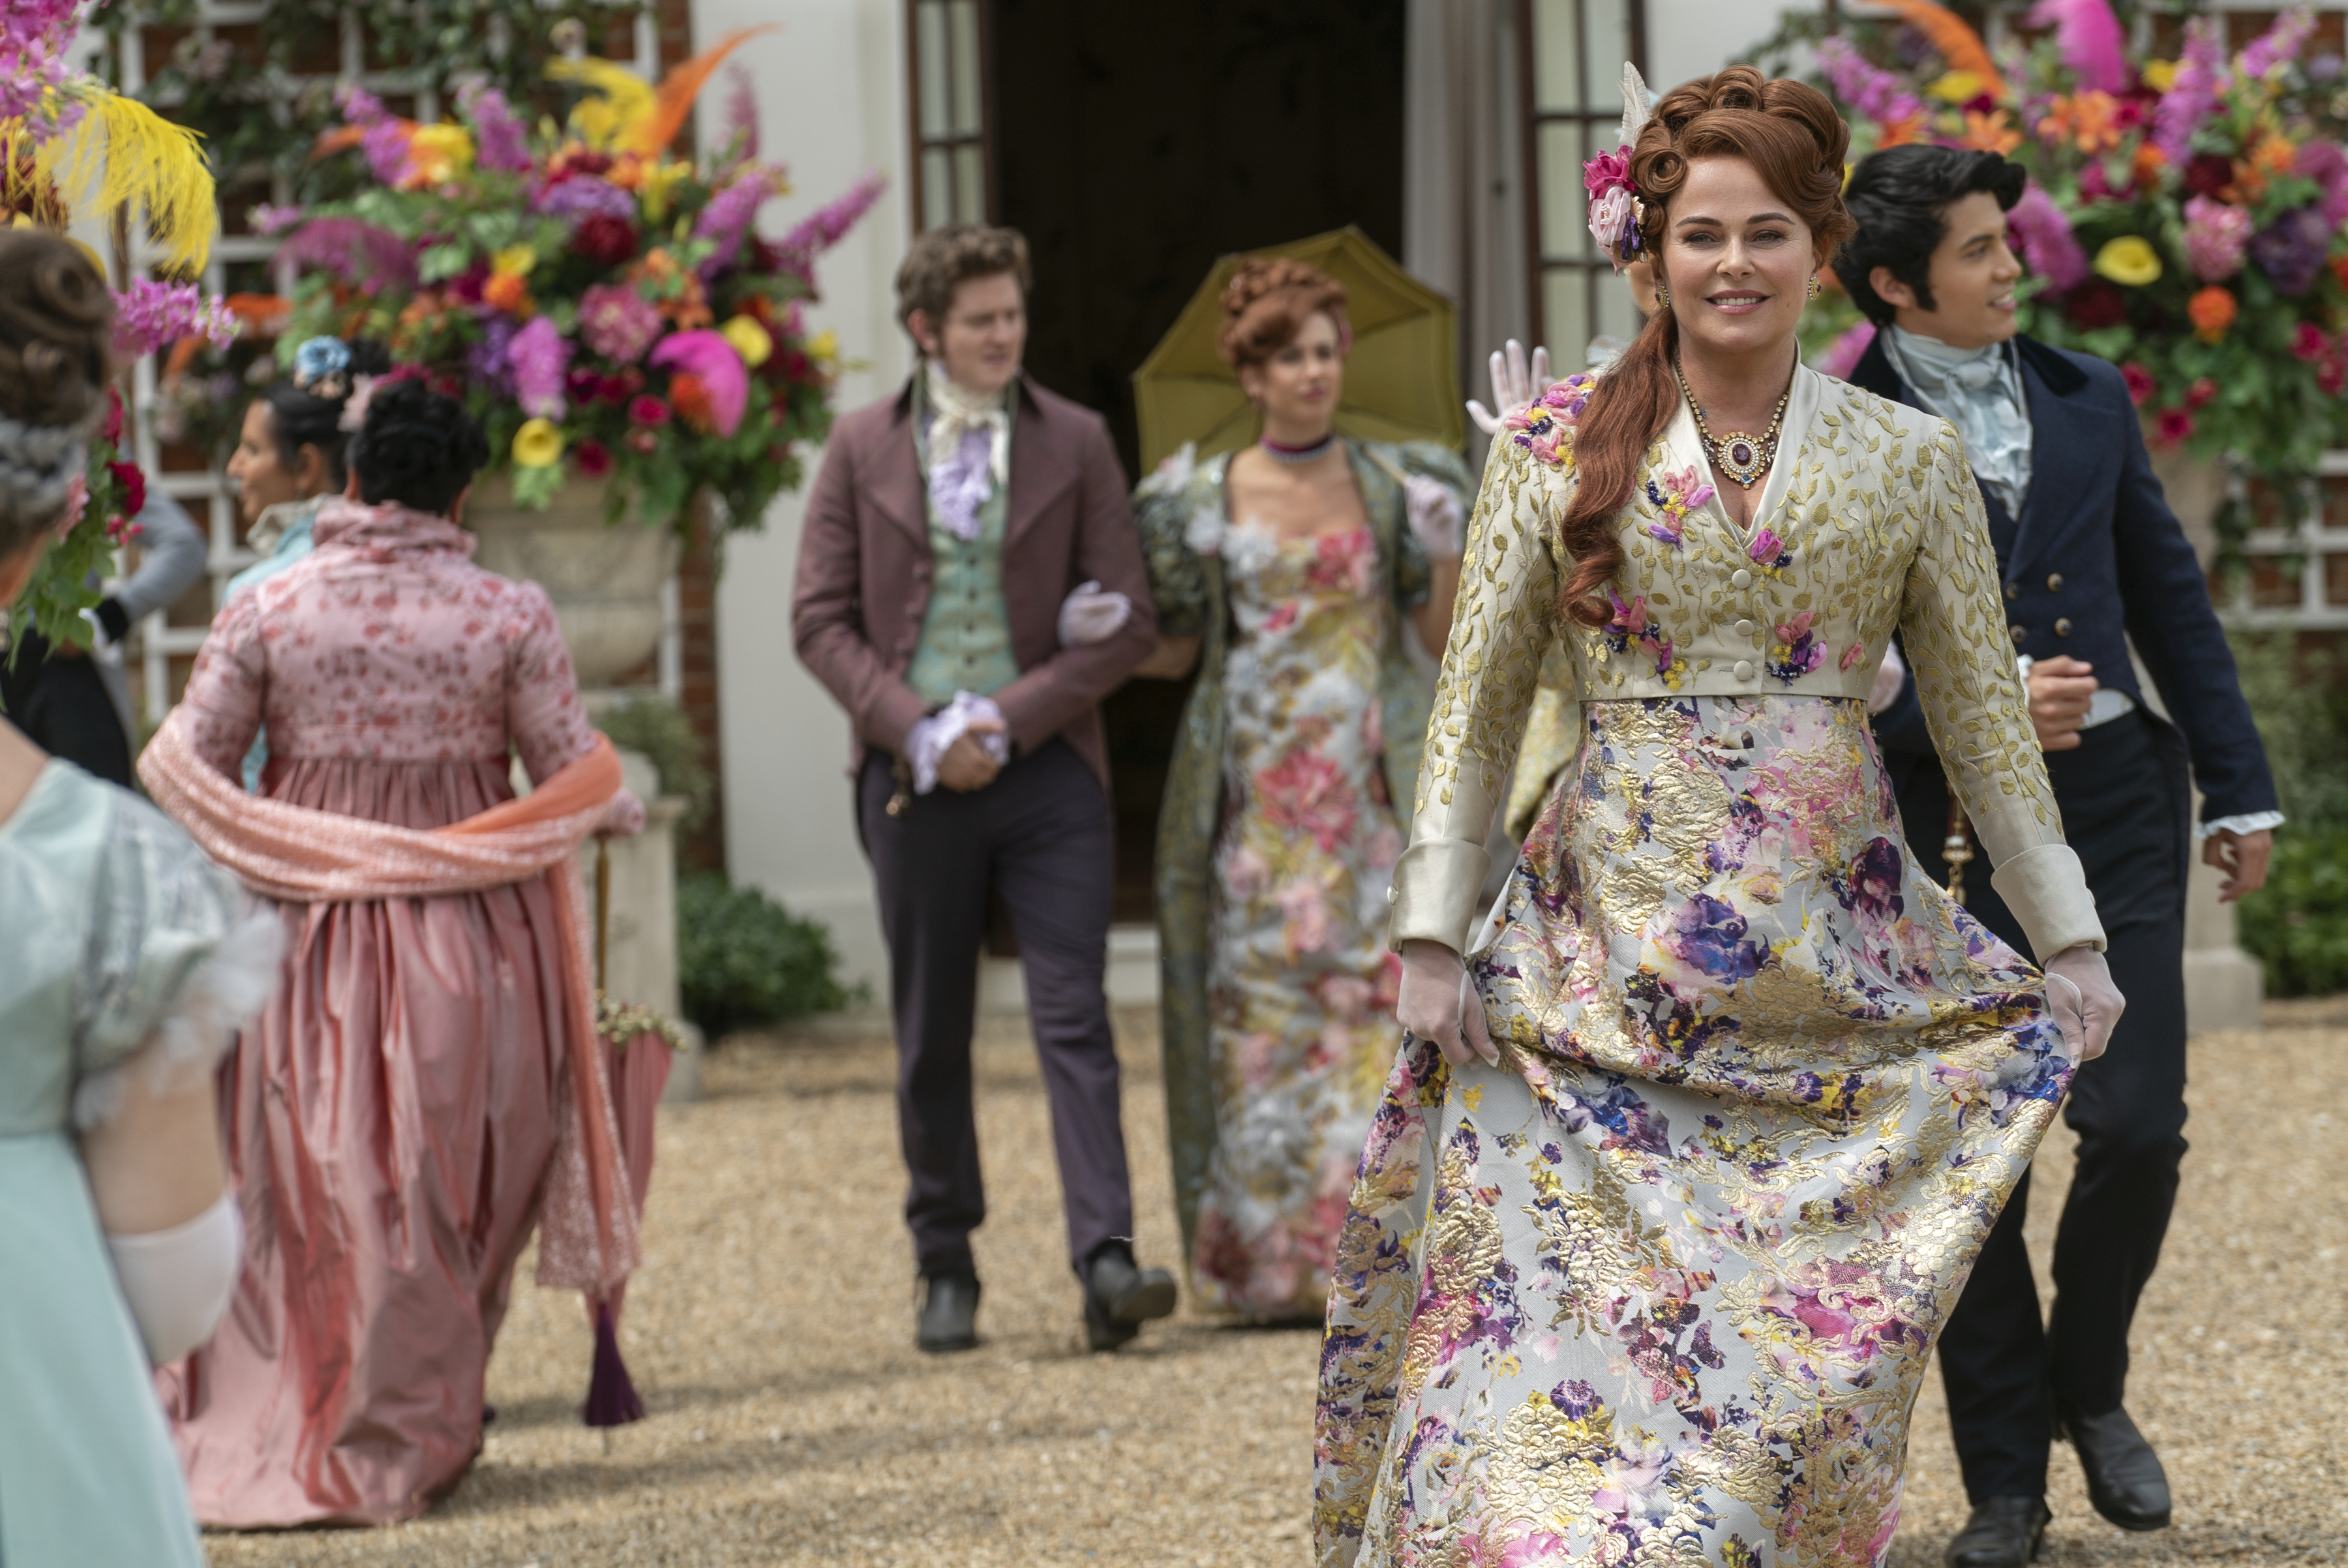 <p>Lorn Macdonald plays Albion Finch, Harriet Cains plays Philipa Featherington, Polly Walker plays Lady Portia Featherington and James Phoon plays Harry Dankworth in episode 1, season 3 of "Bridgerton," which debuts on Netflix on May 16, 2024.</p>